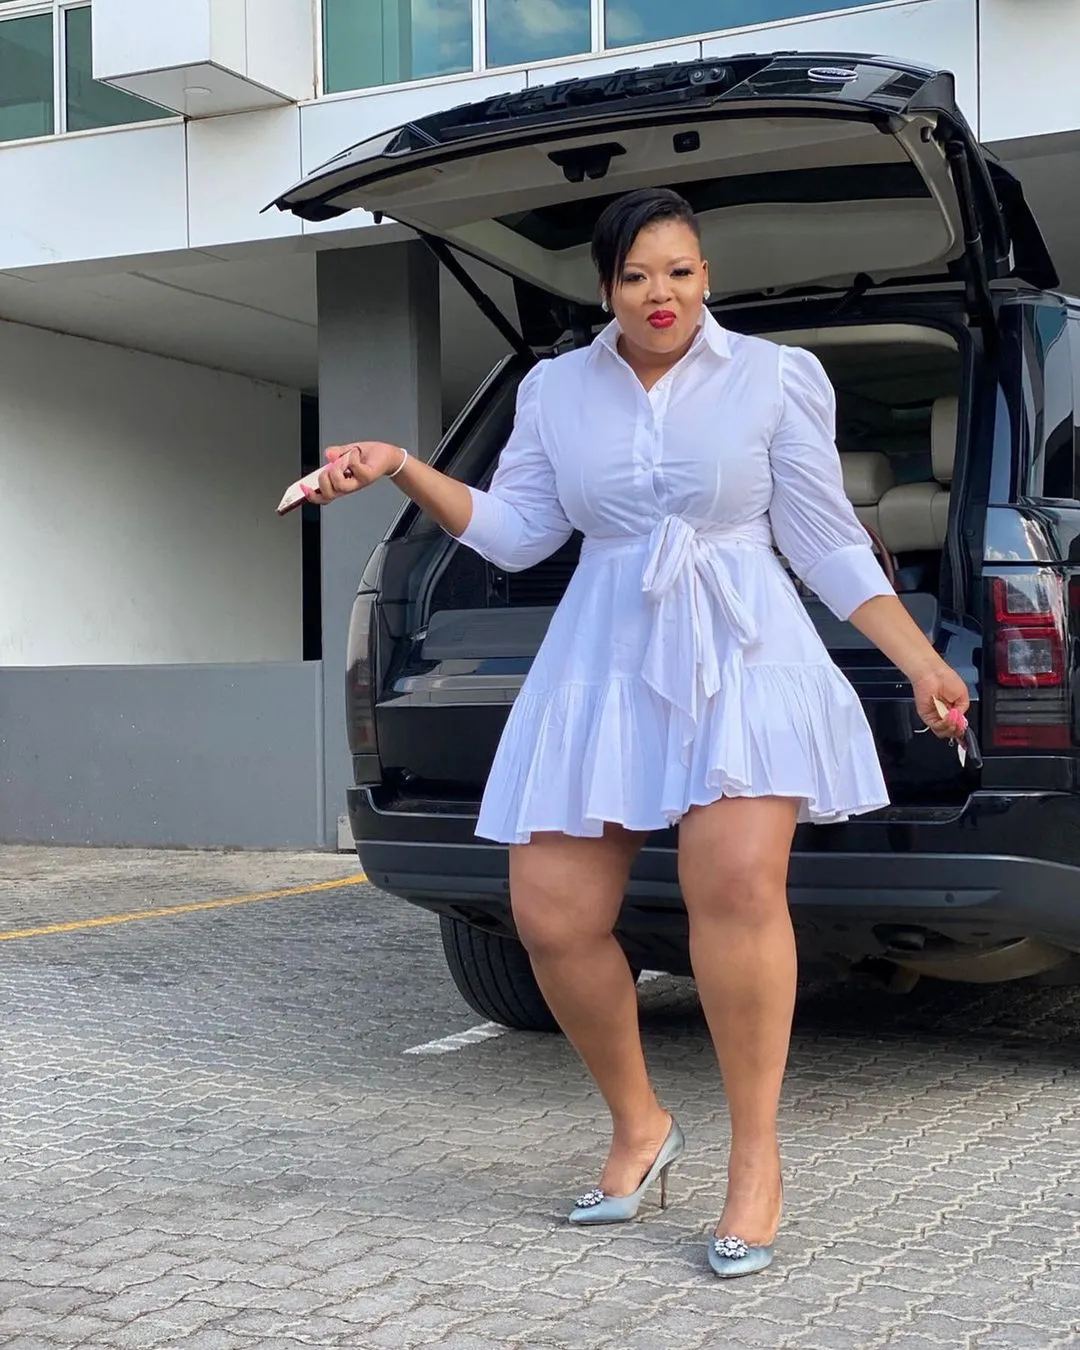 Anele Mdoda Employs Twitter User to Work At Her Father’s New School